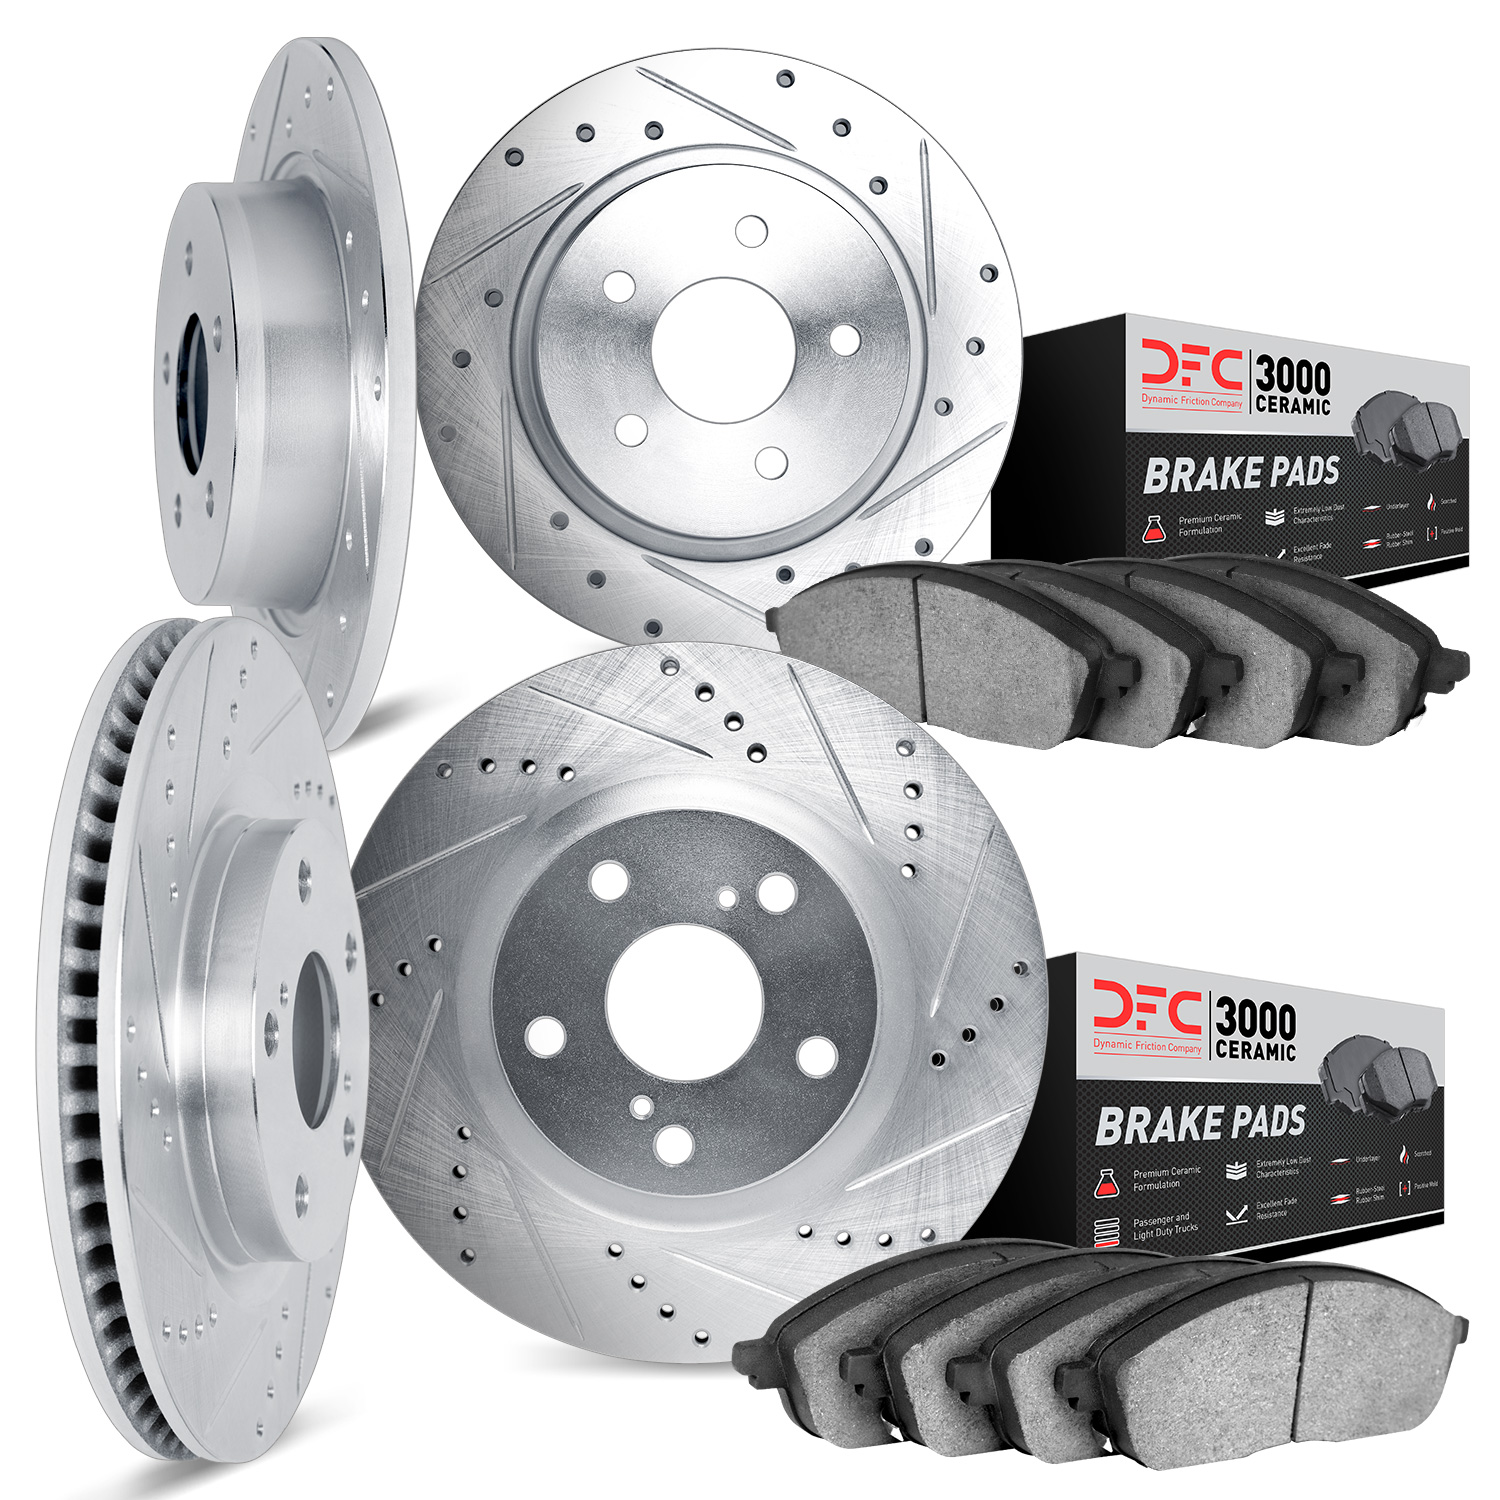 7304-73040 Drilled/Slotted Brake Rotor with 3000-Series Ceramic Brake Pads Kit [Silver], 1999-2005 Audi/Volkswagen, Position: Fr